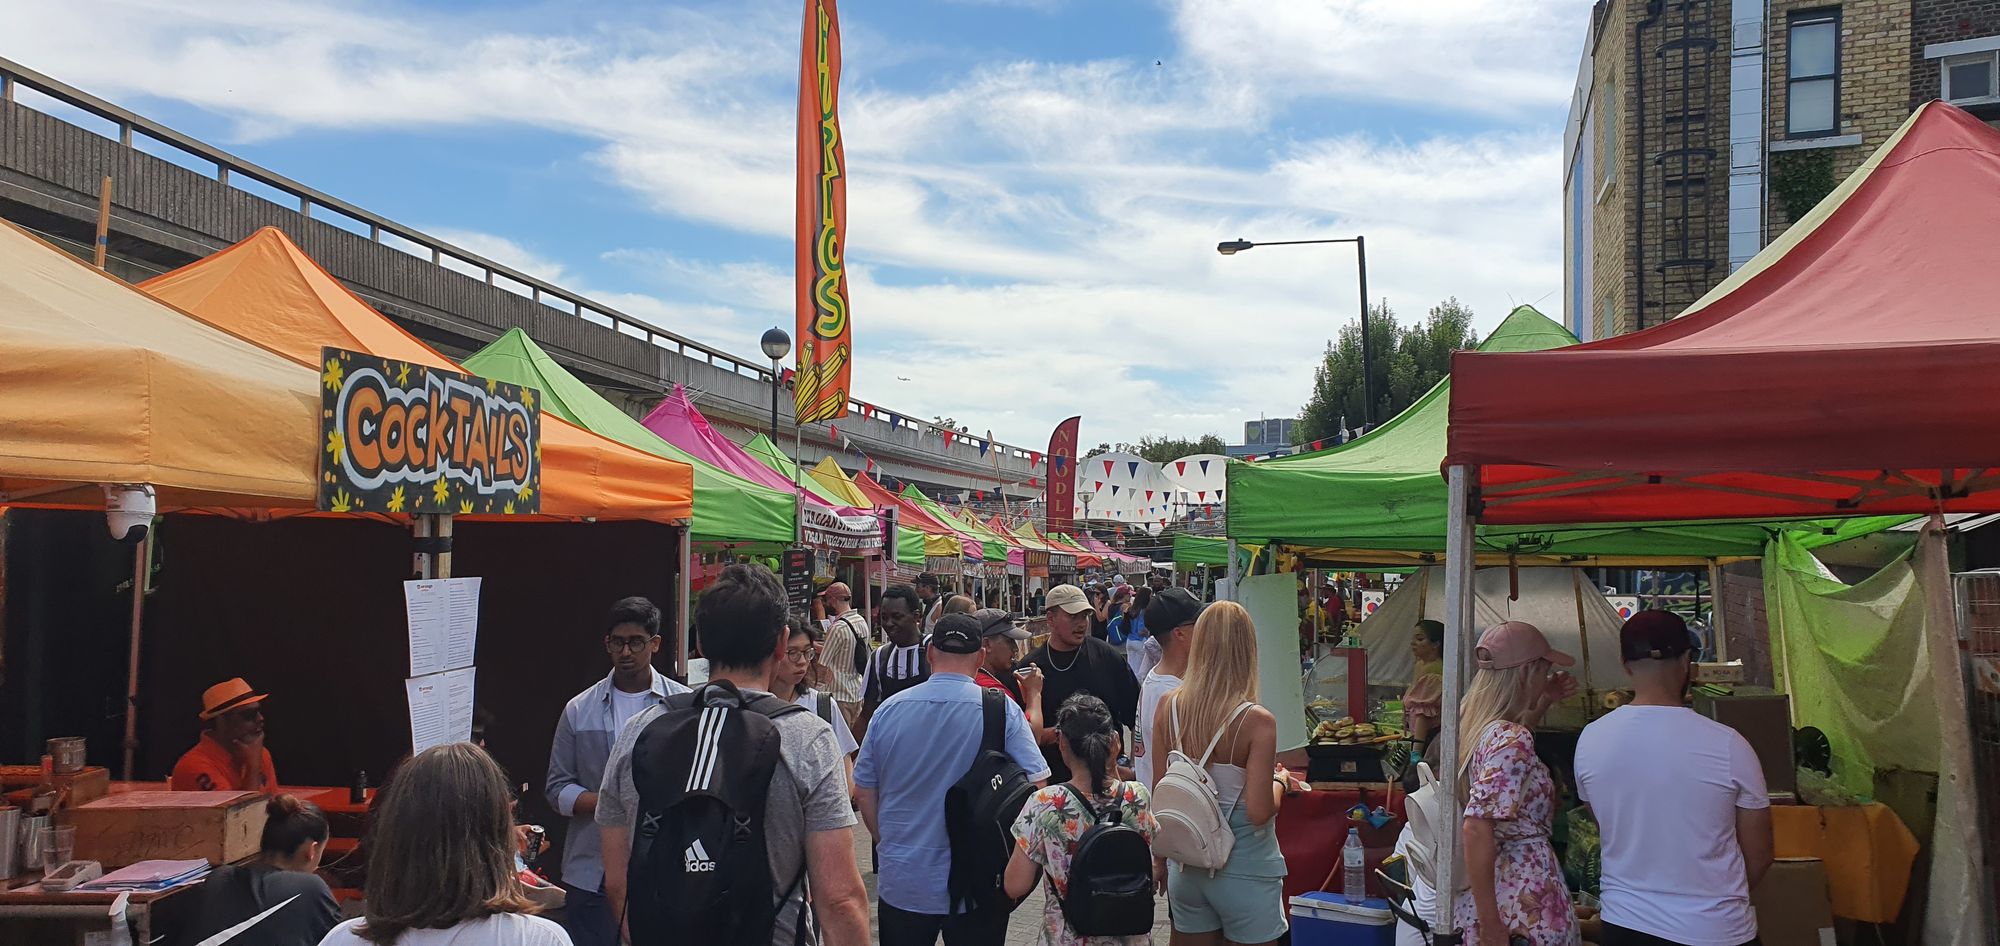 List of Top 10 Best Food Markets and Street Food Stalls in London